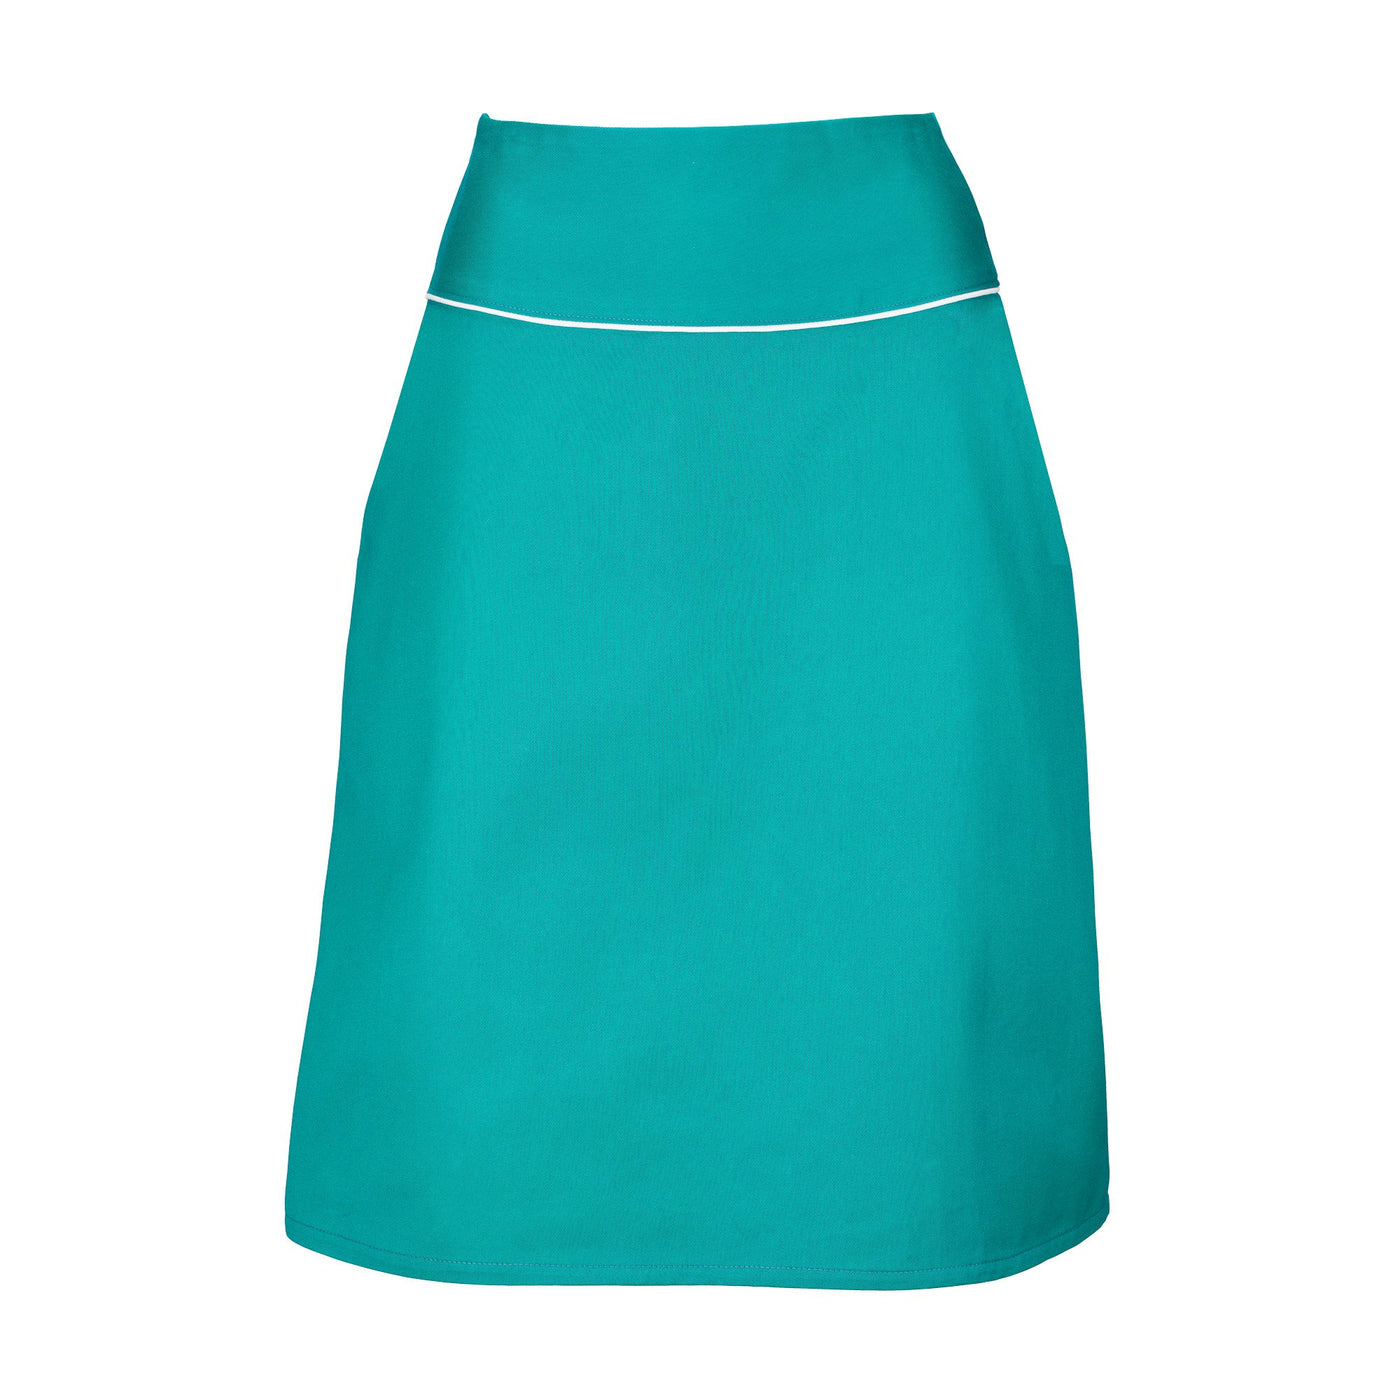 Turquoise A-Line Skirt Suzy